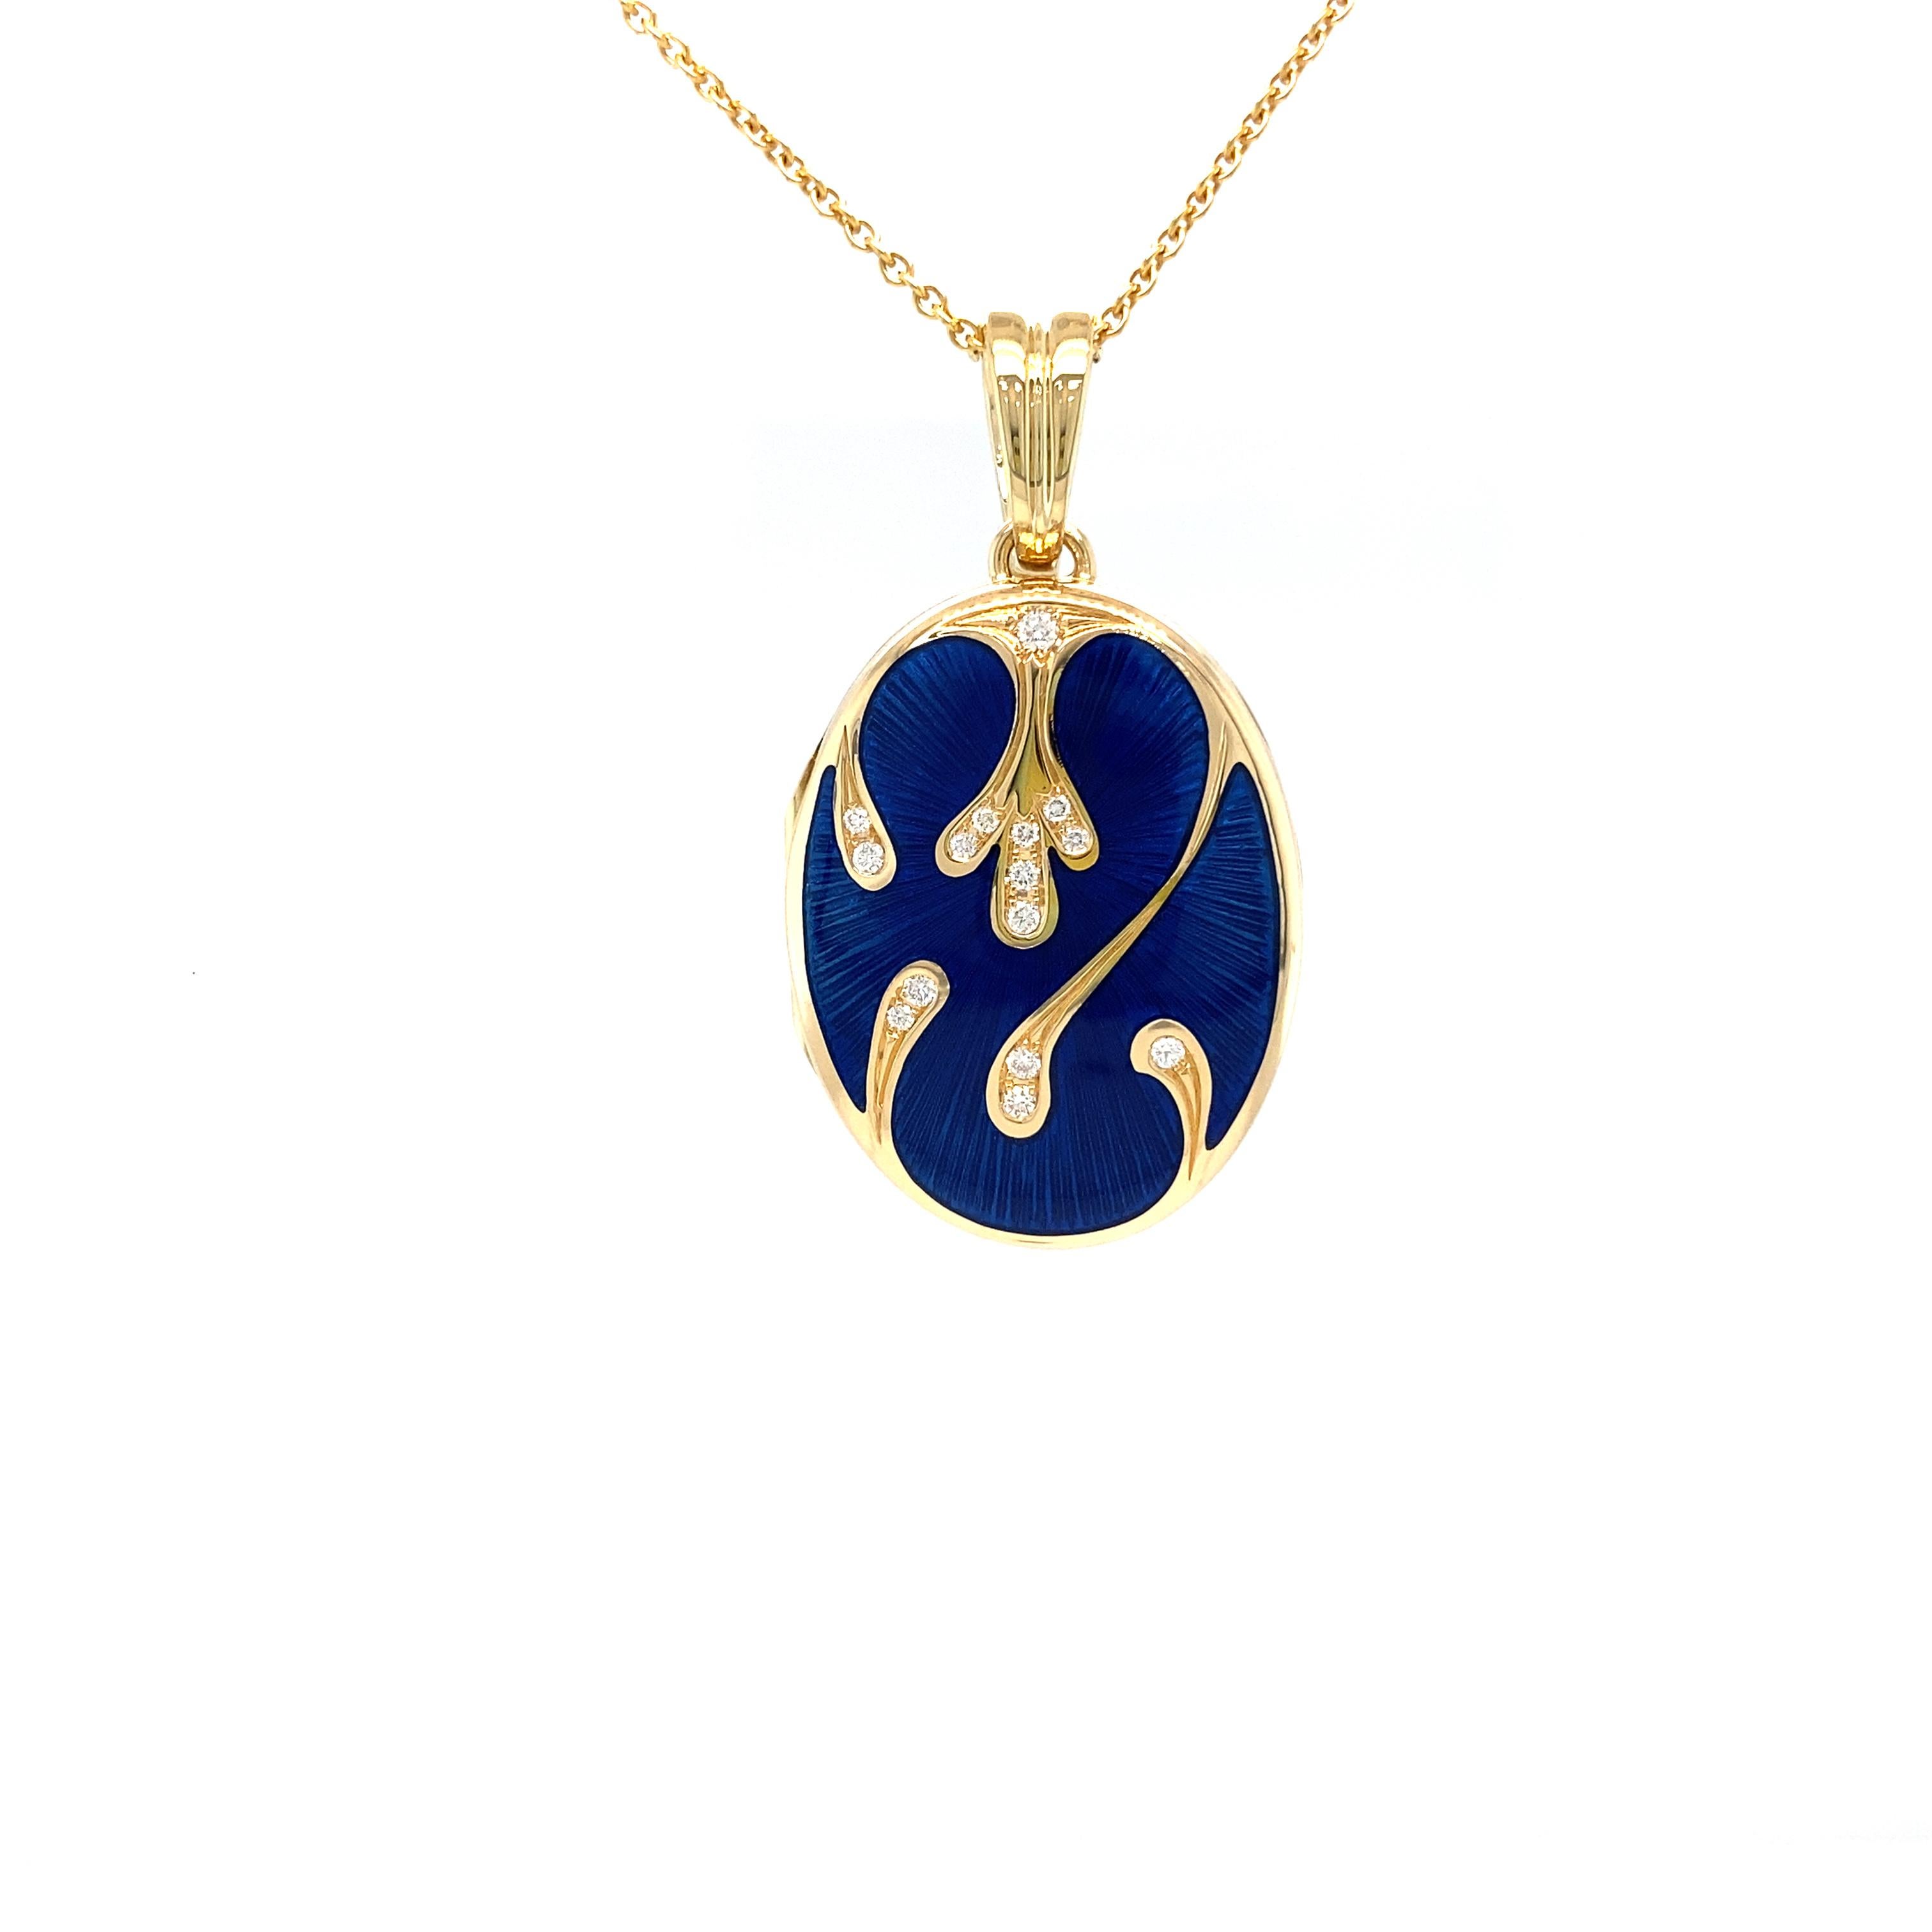 Victor Mayer oval locket pendant 18k yellow gold, Hallmark collection, translucent electric blue vitreous enamel, guilloche, 15 diamonds, total 0.16 ct, H VS, brilliant cut, measurements app. 27.0 mm x 20.0 mm

About the creator Victor Mayer 
Victor